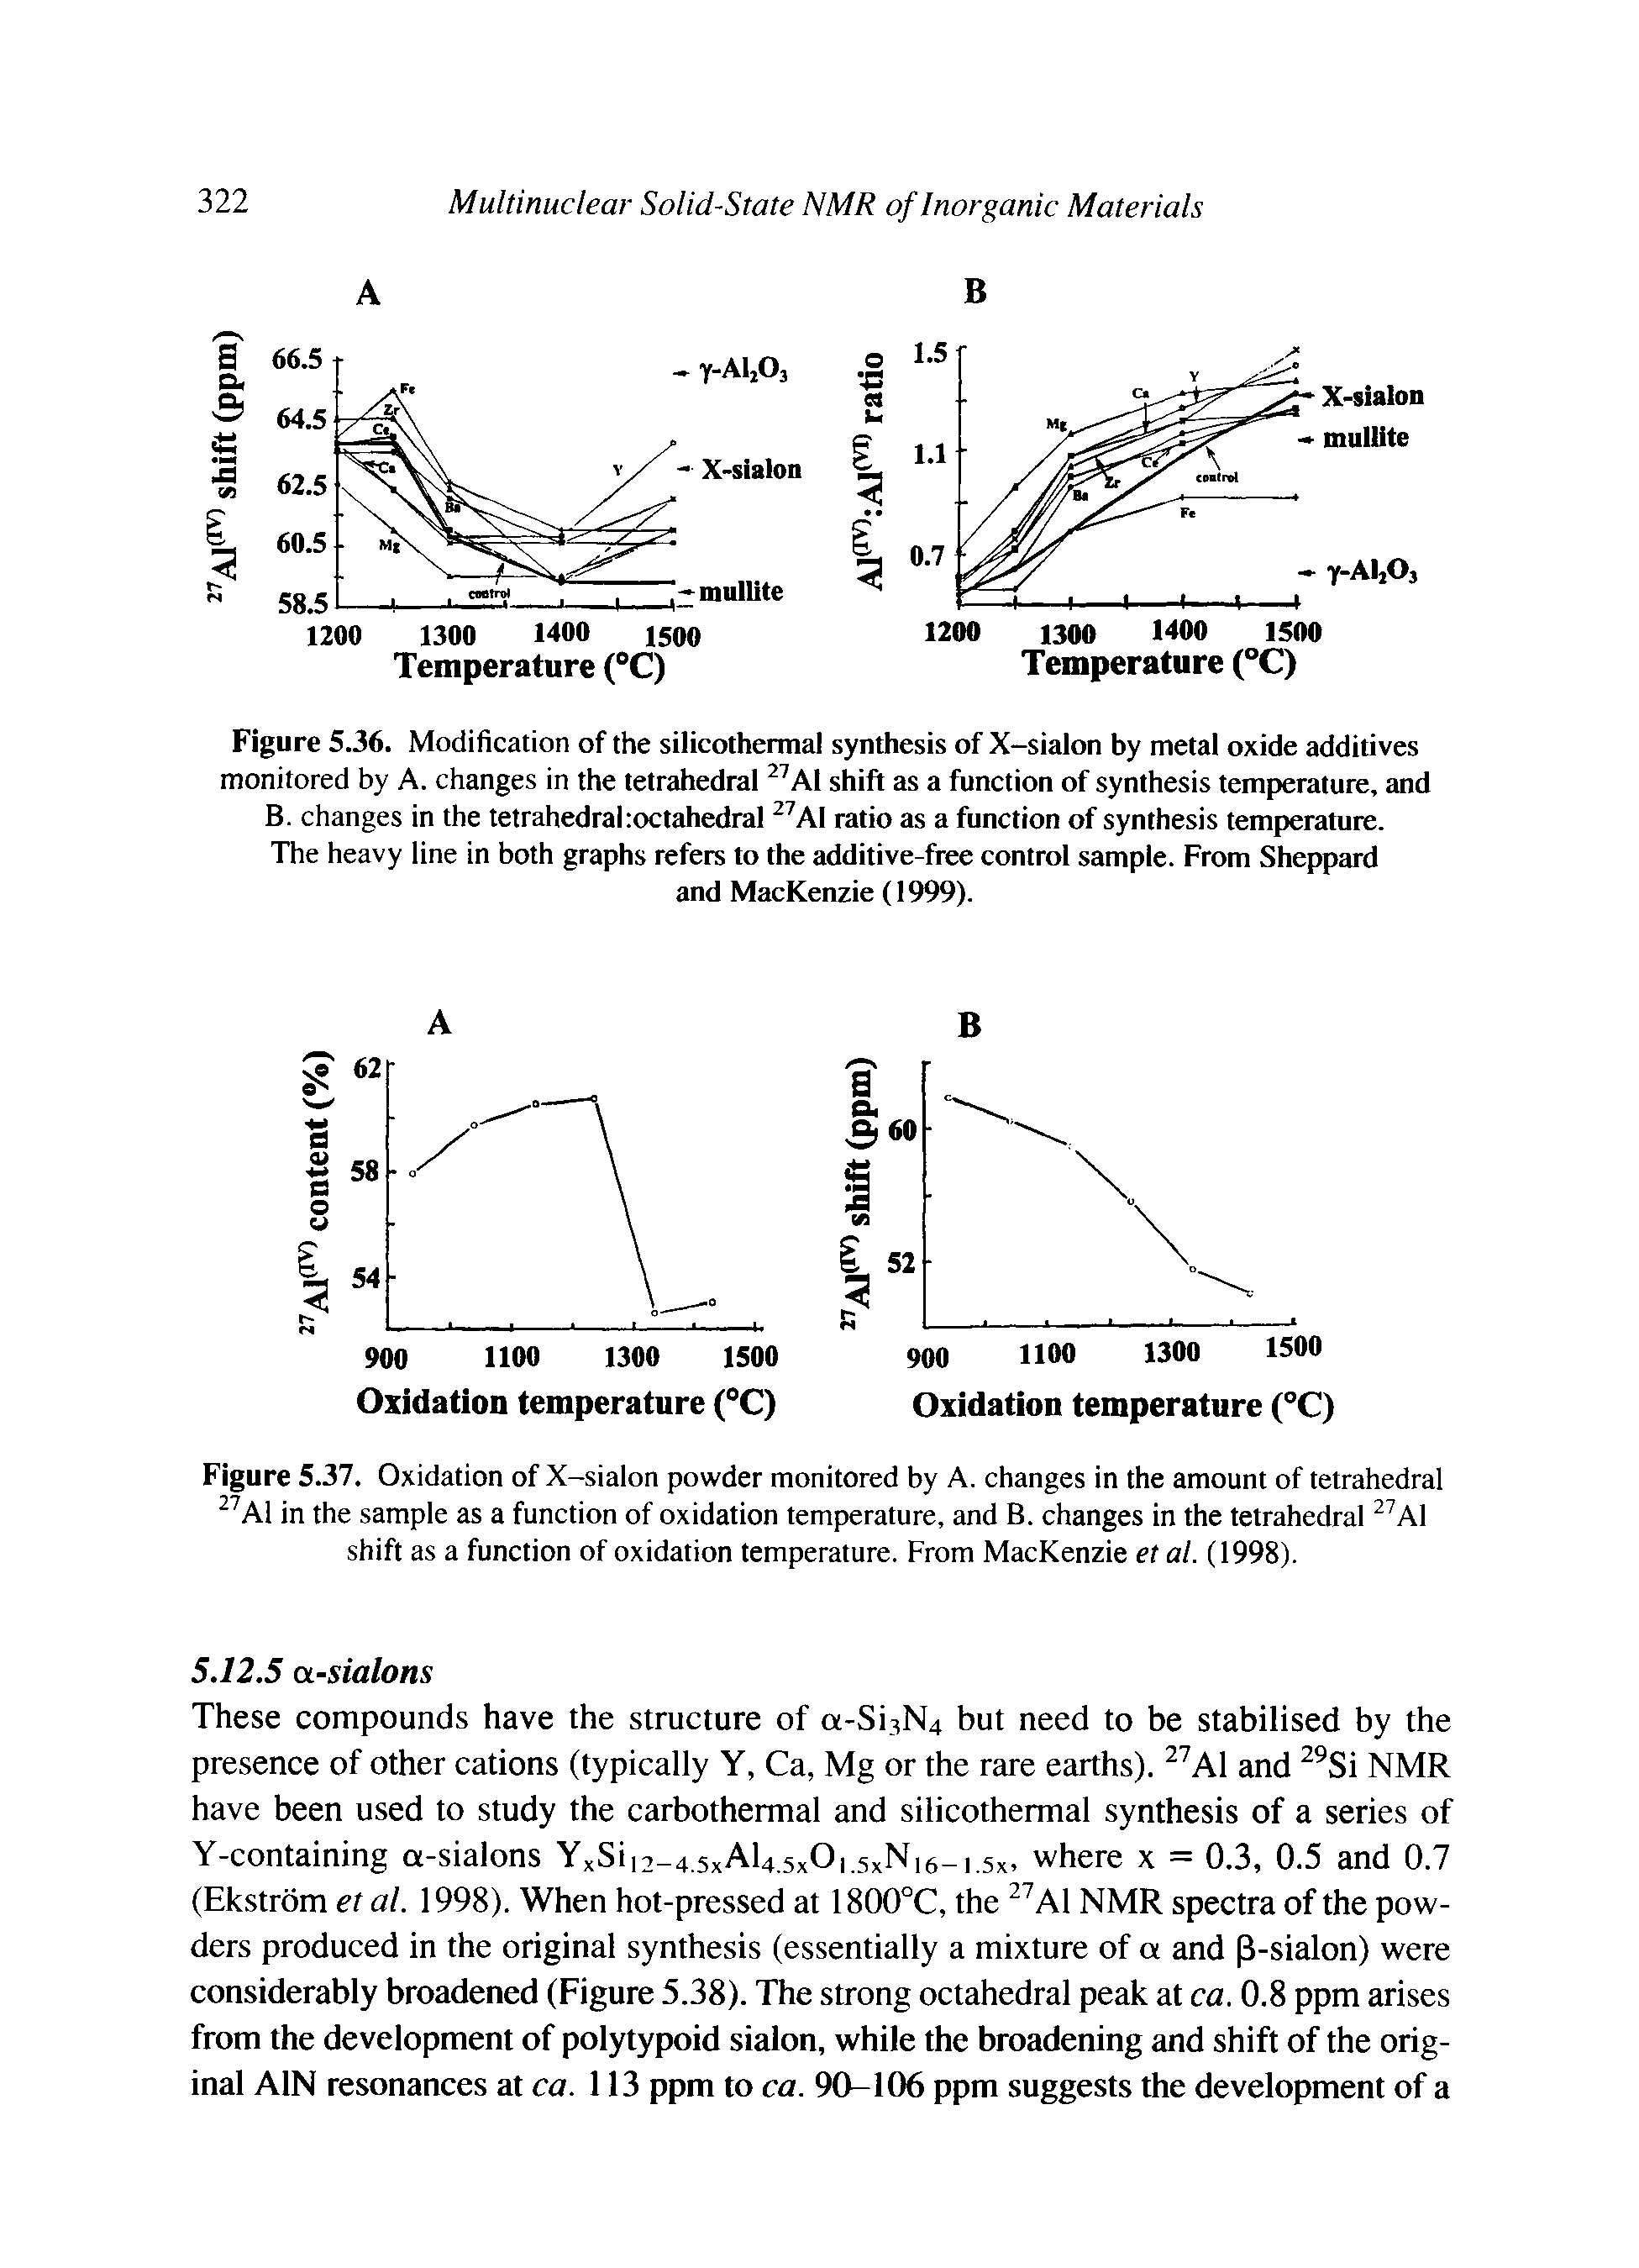 Figure 5.36. Modification of the silicothemial synthesis of X-sialon by metal oxide additives monitored by A. changes in the tetrahedral Al shift as a function of synthesis temperature, and B. changes in the tetrahedralroctahedral Al ratio as a function of synthesis temperature. The heavy line in both graphs refers to the additive-free control sample. From Sheppard...